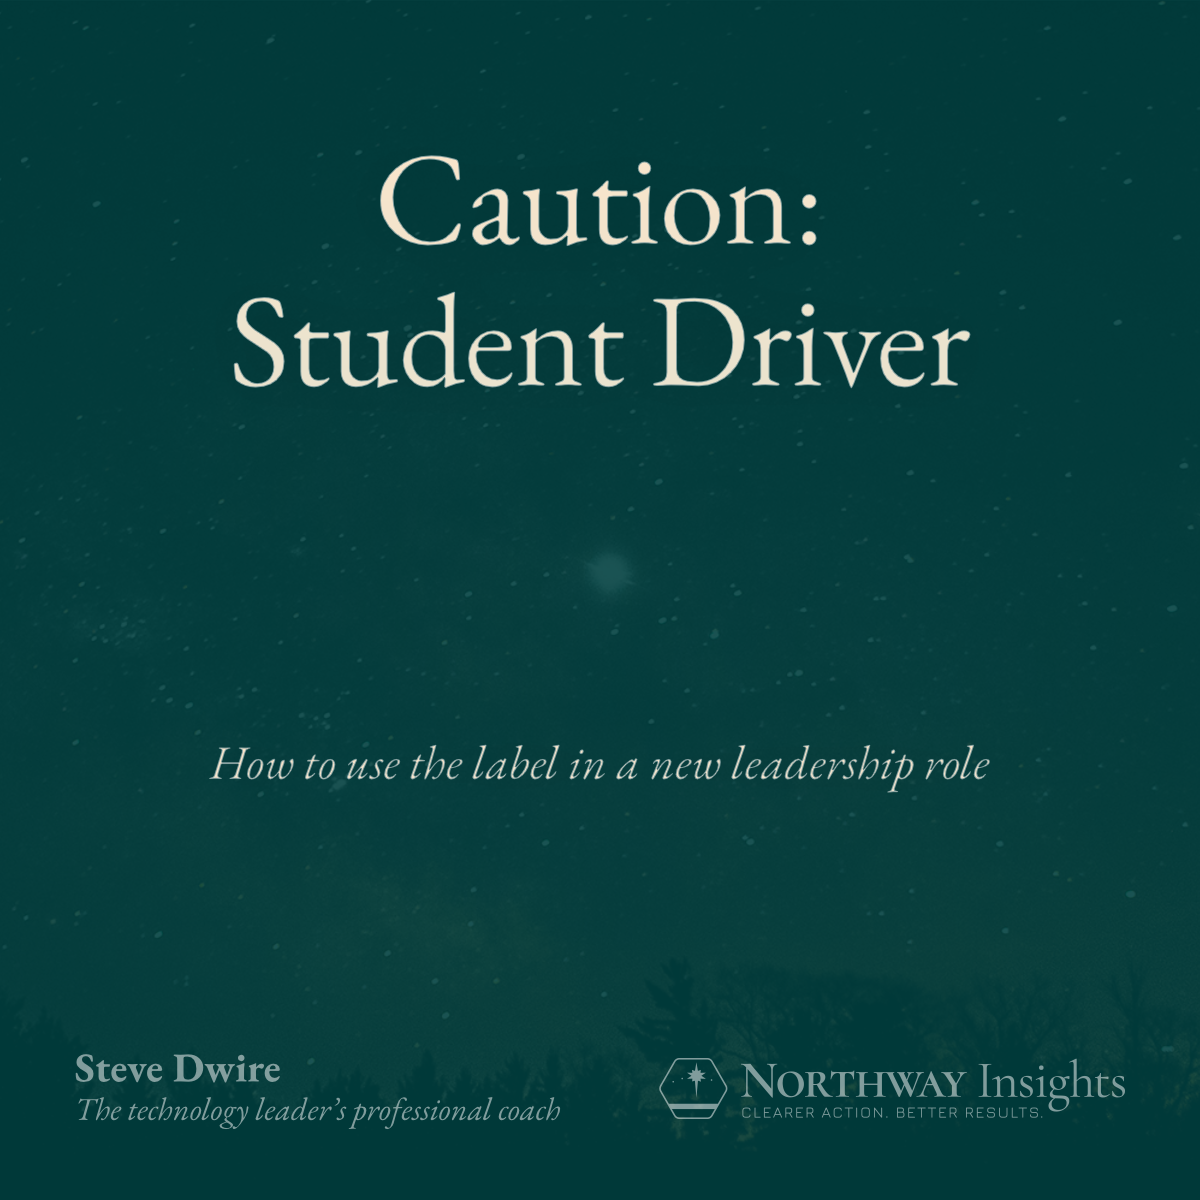 Caution: Student Driver (How to use the label in a new leadership role)